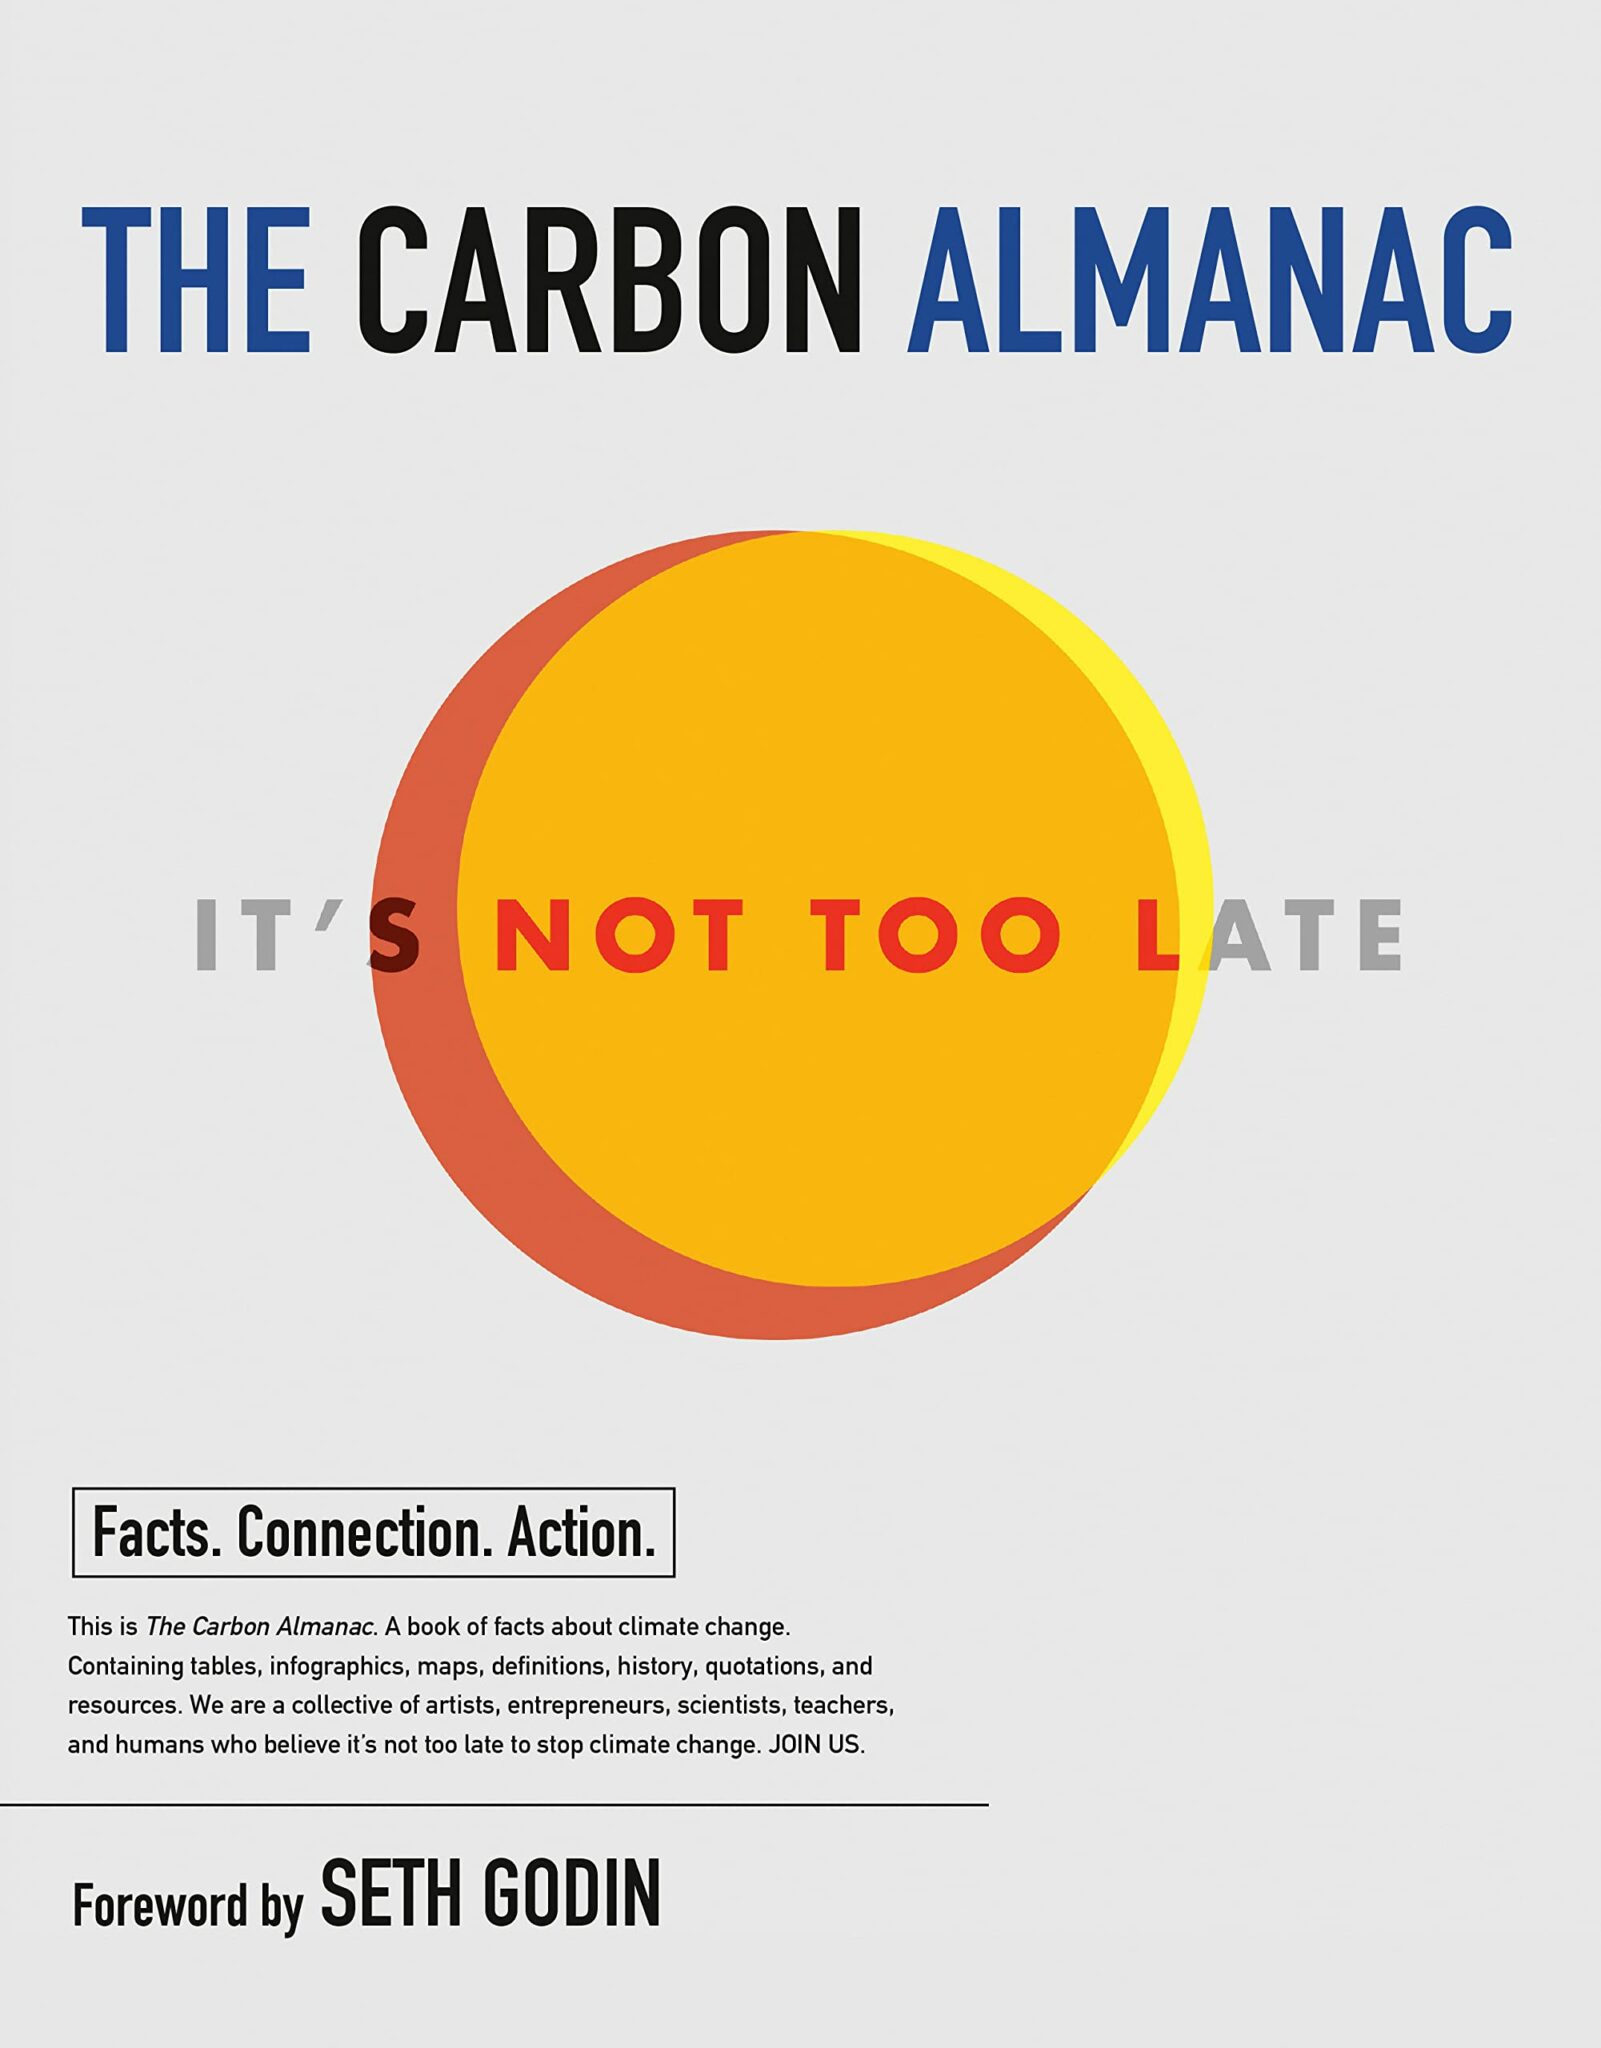 the carbon almanac book cover of a yellow and red circle on a grey background